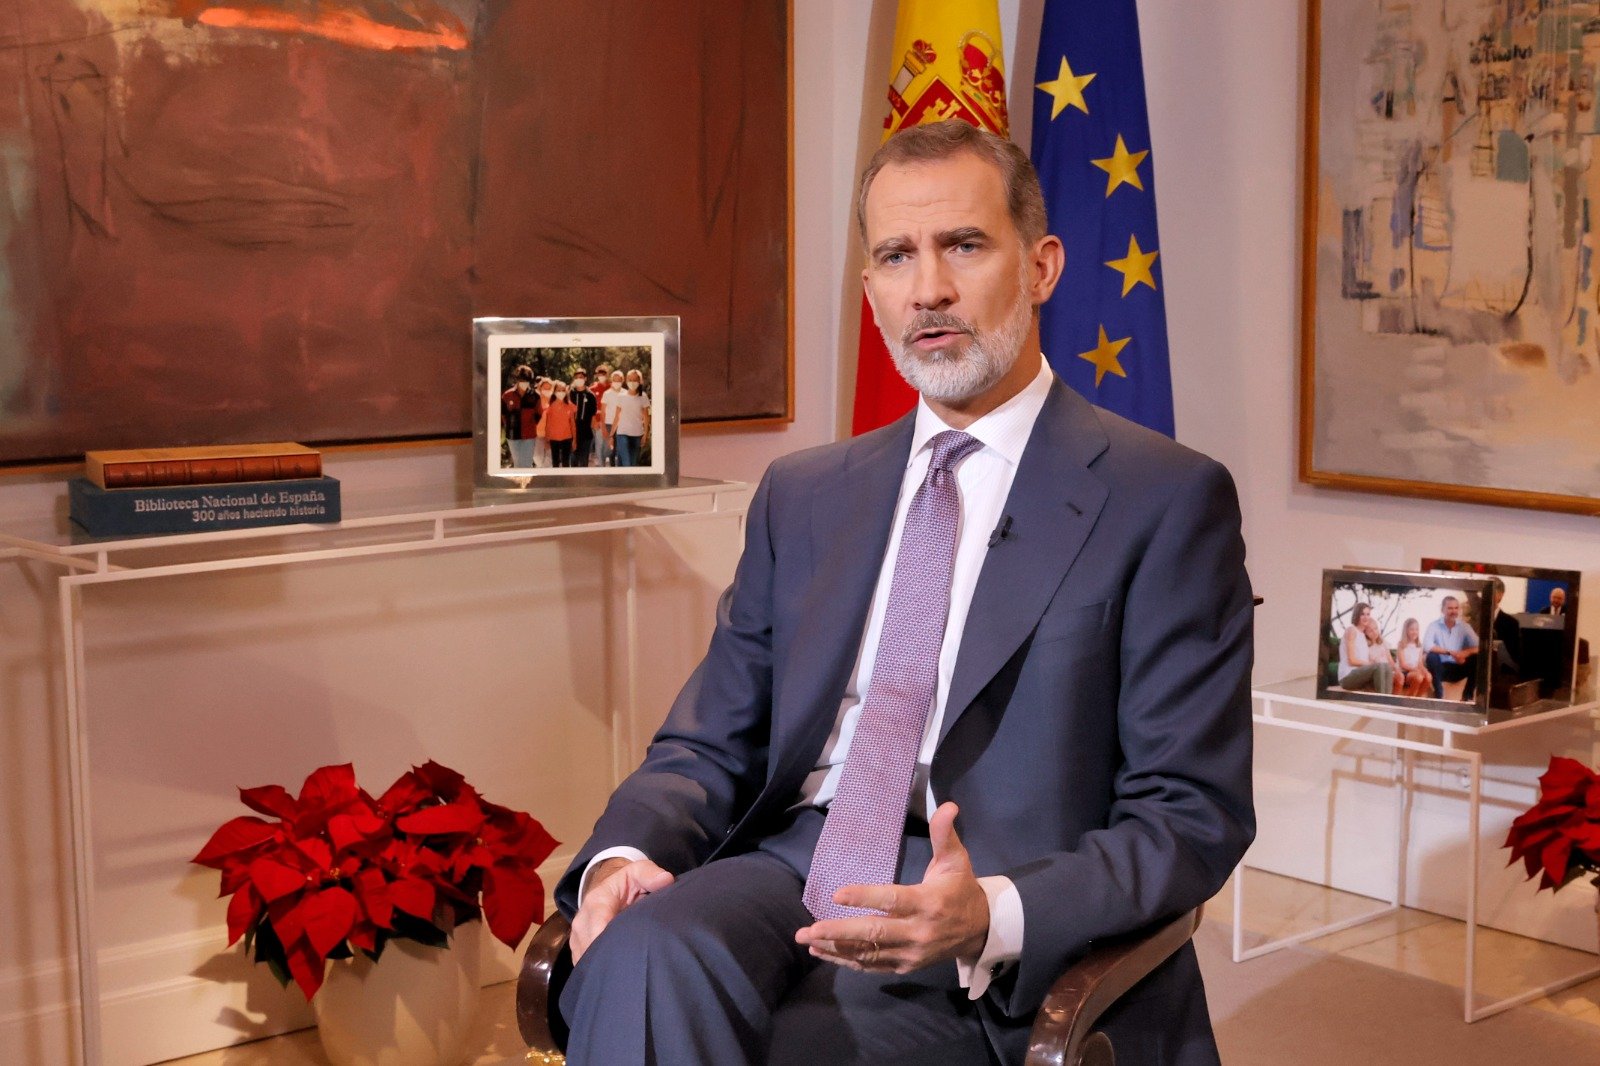 Felipe VI appeals to "moral integrity" of Spaniards, but doesn't mention his father